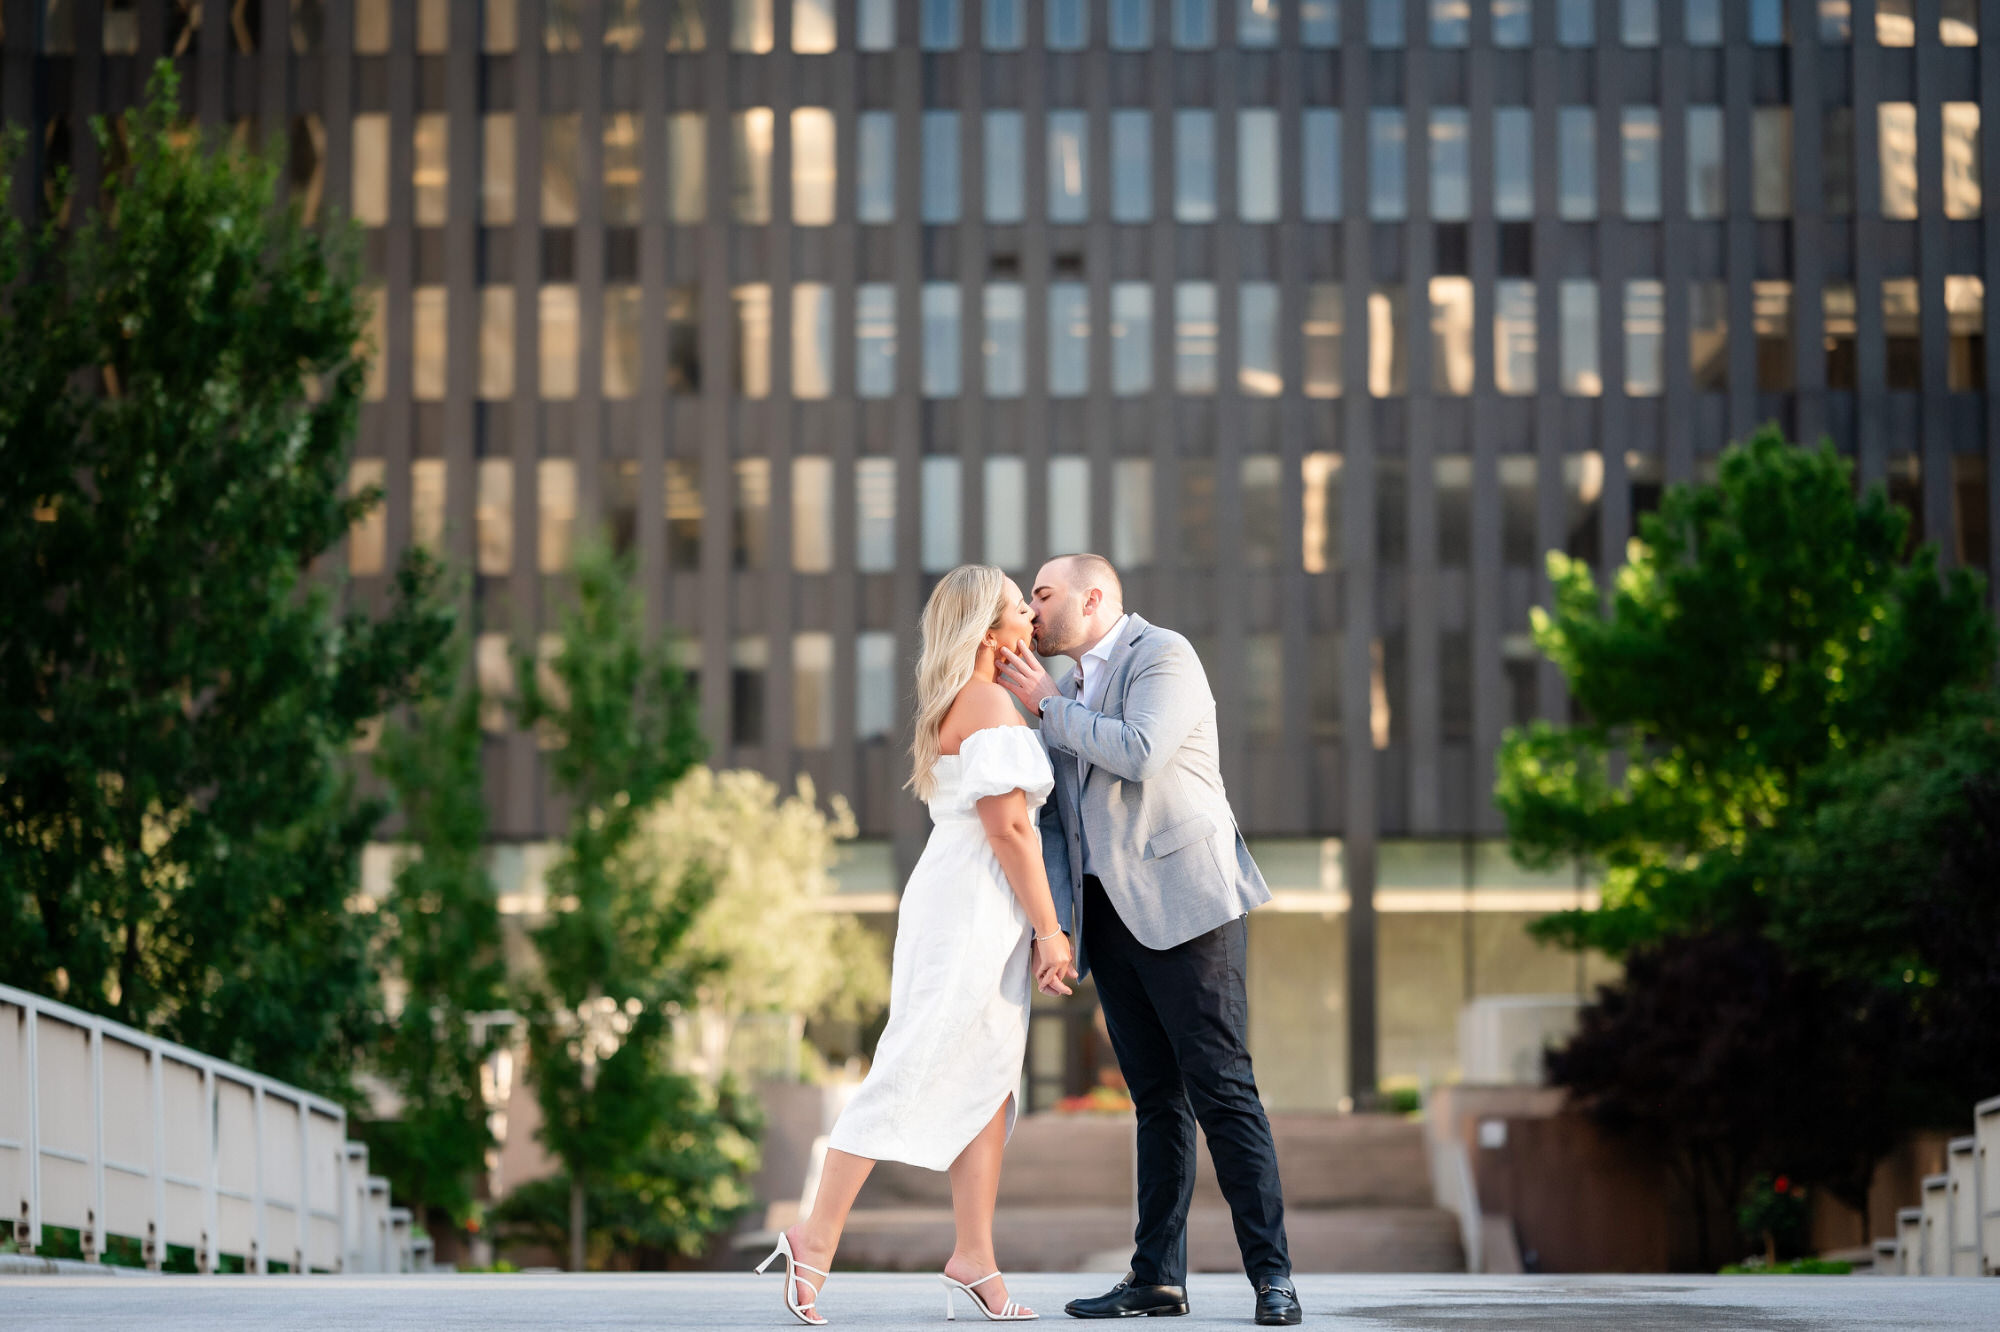 downtown PPG plaza engagement photo • Engagements